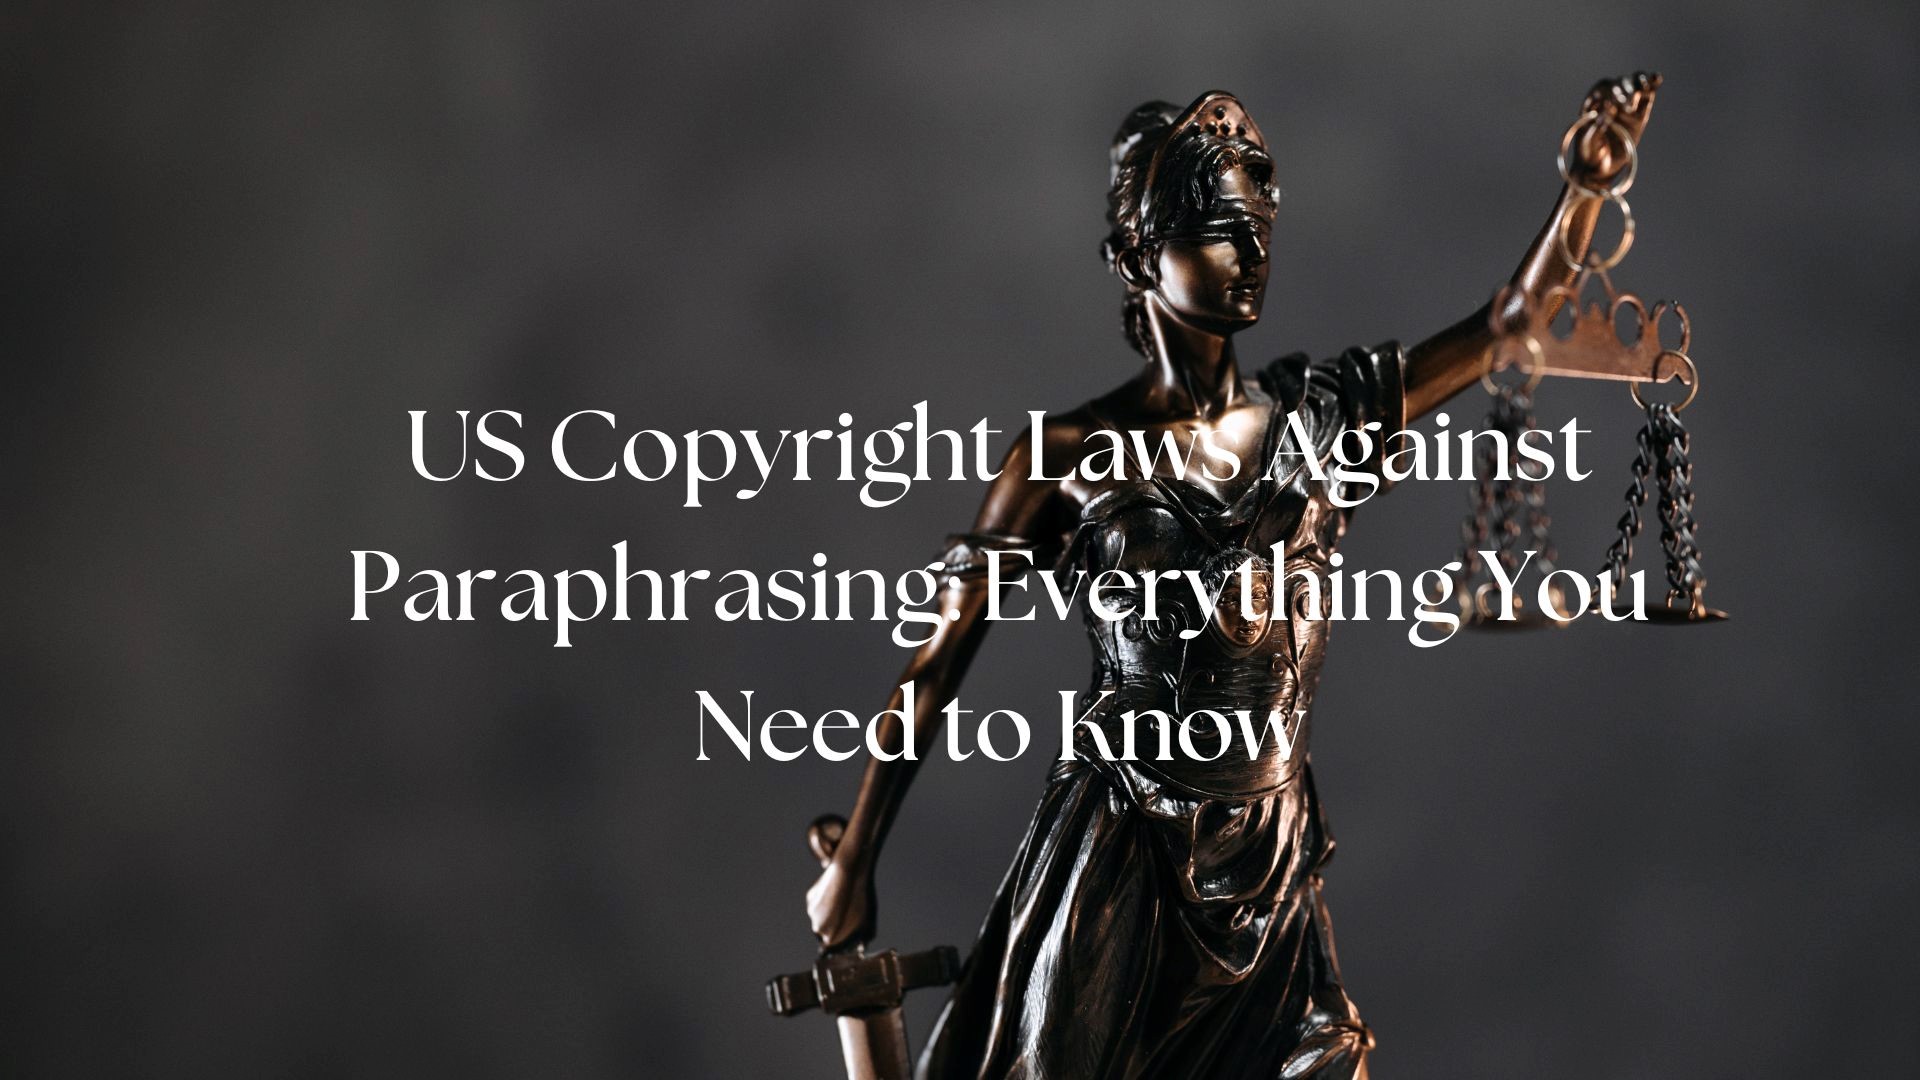 US Copyright Laws Against Paraphrasing Everything You Need to Know